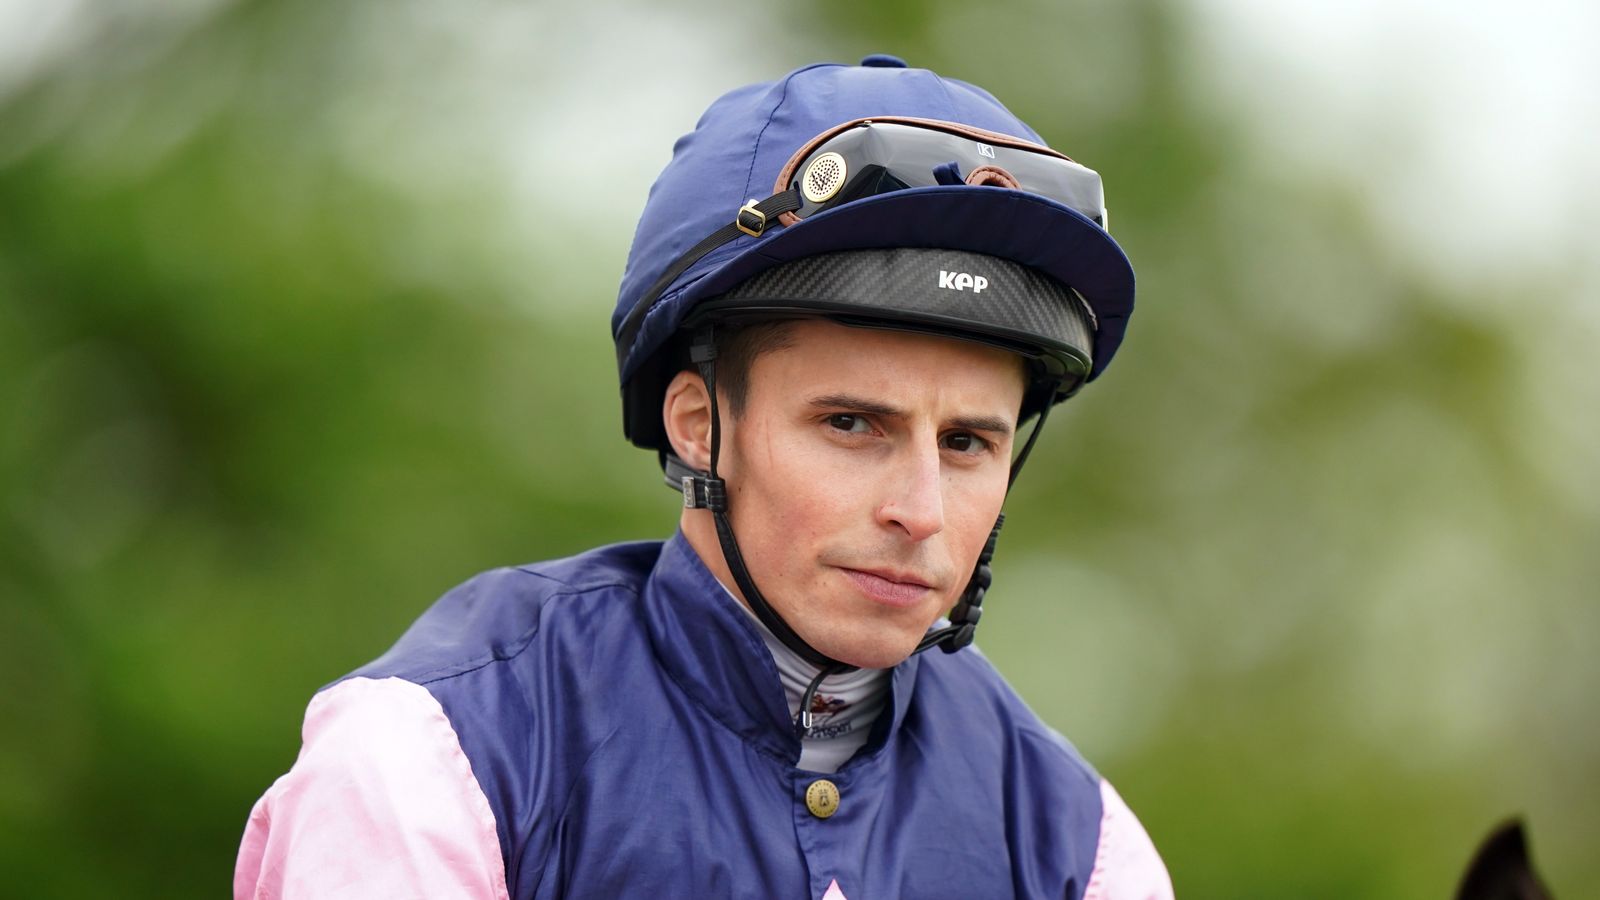 Today on Sky Sports Racing: Jockeys’ Championship leader William Buick booked for in-form Bell Shot at Windsor